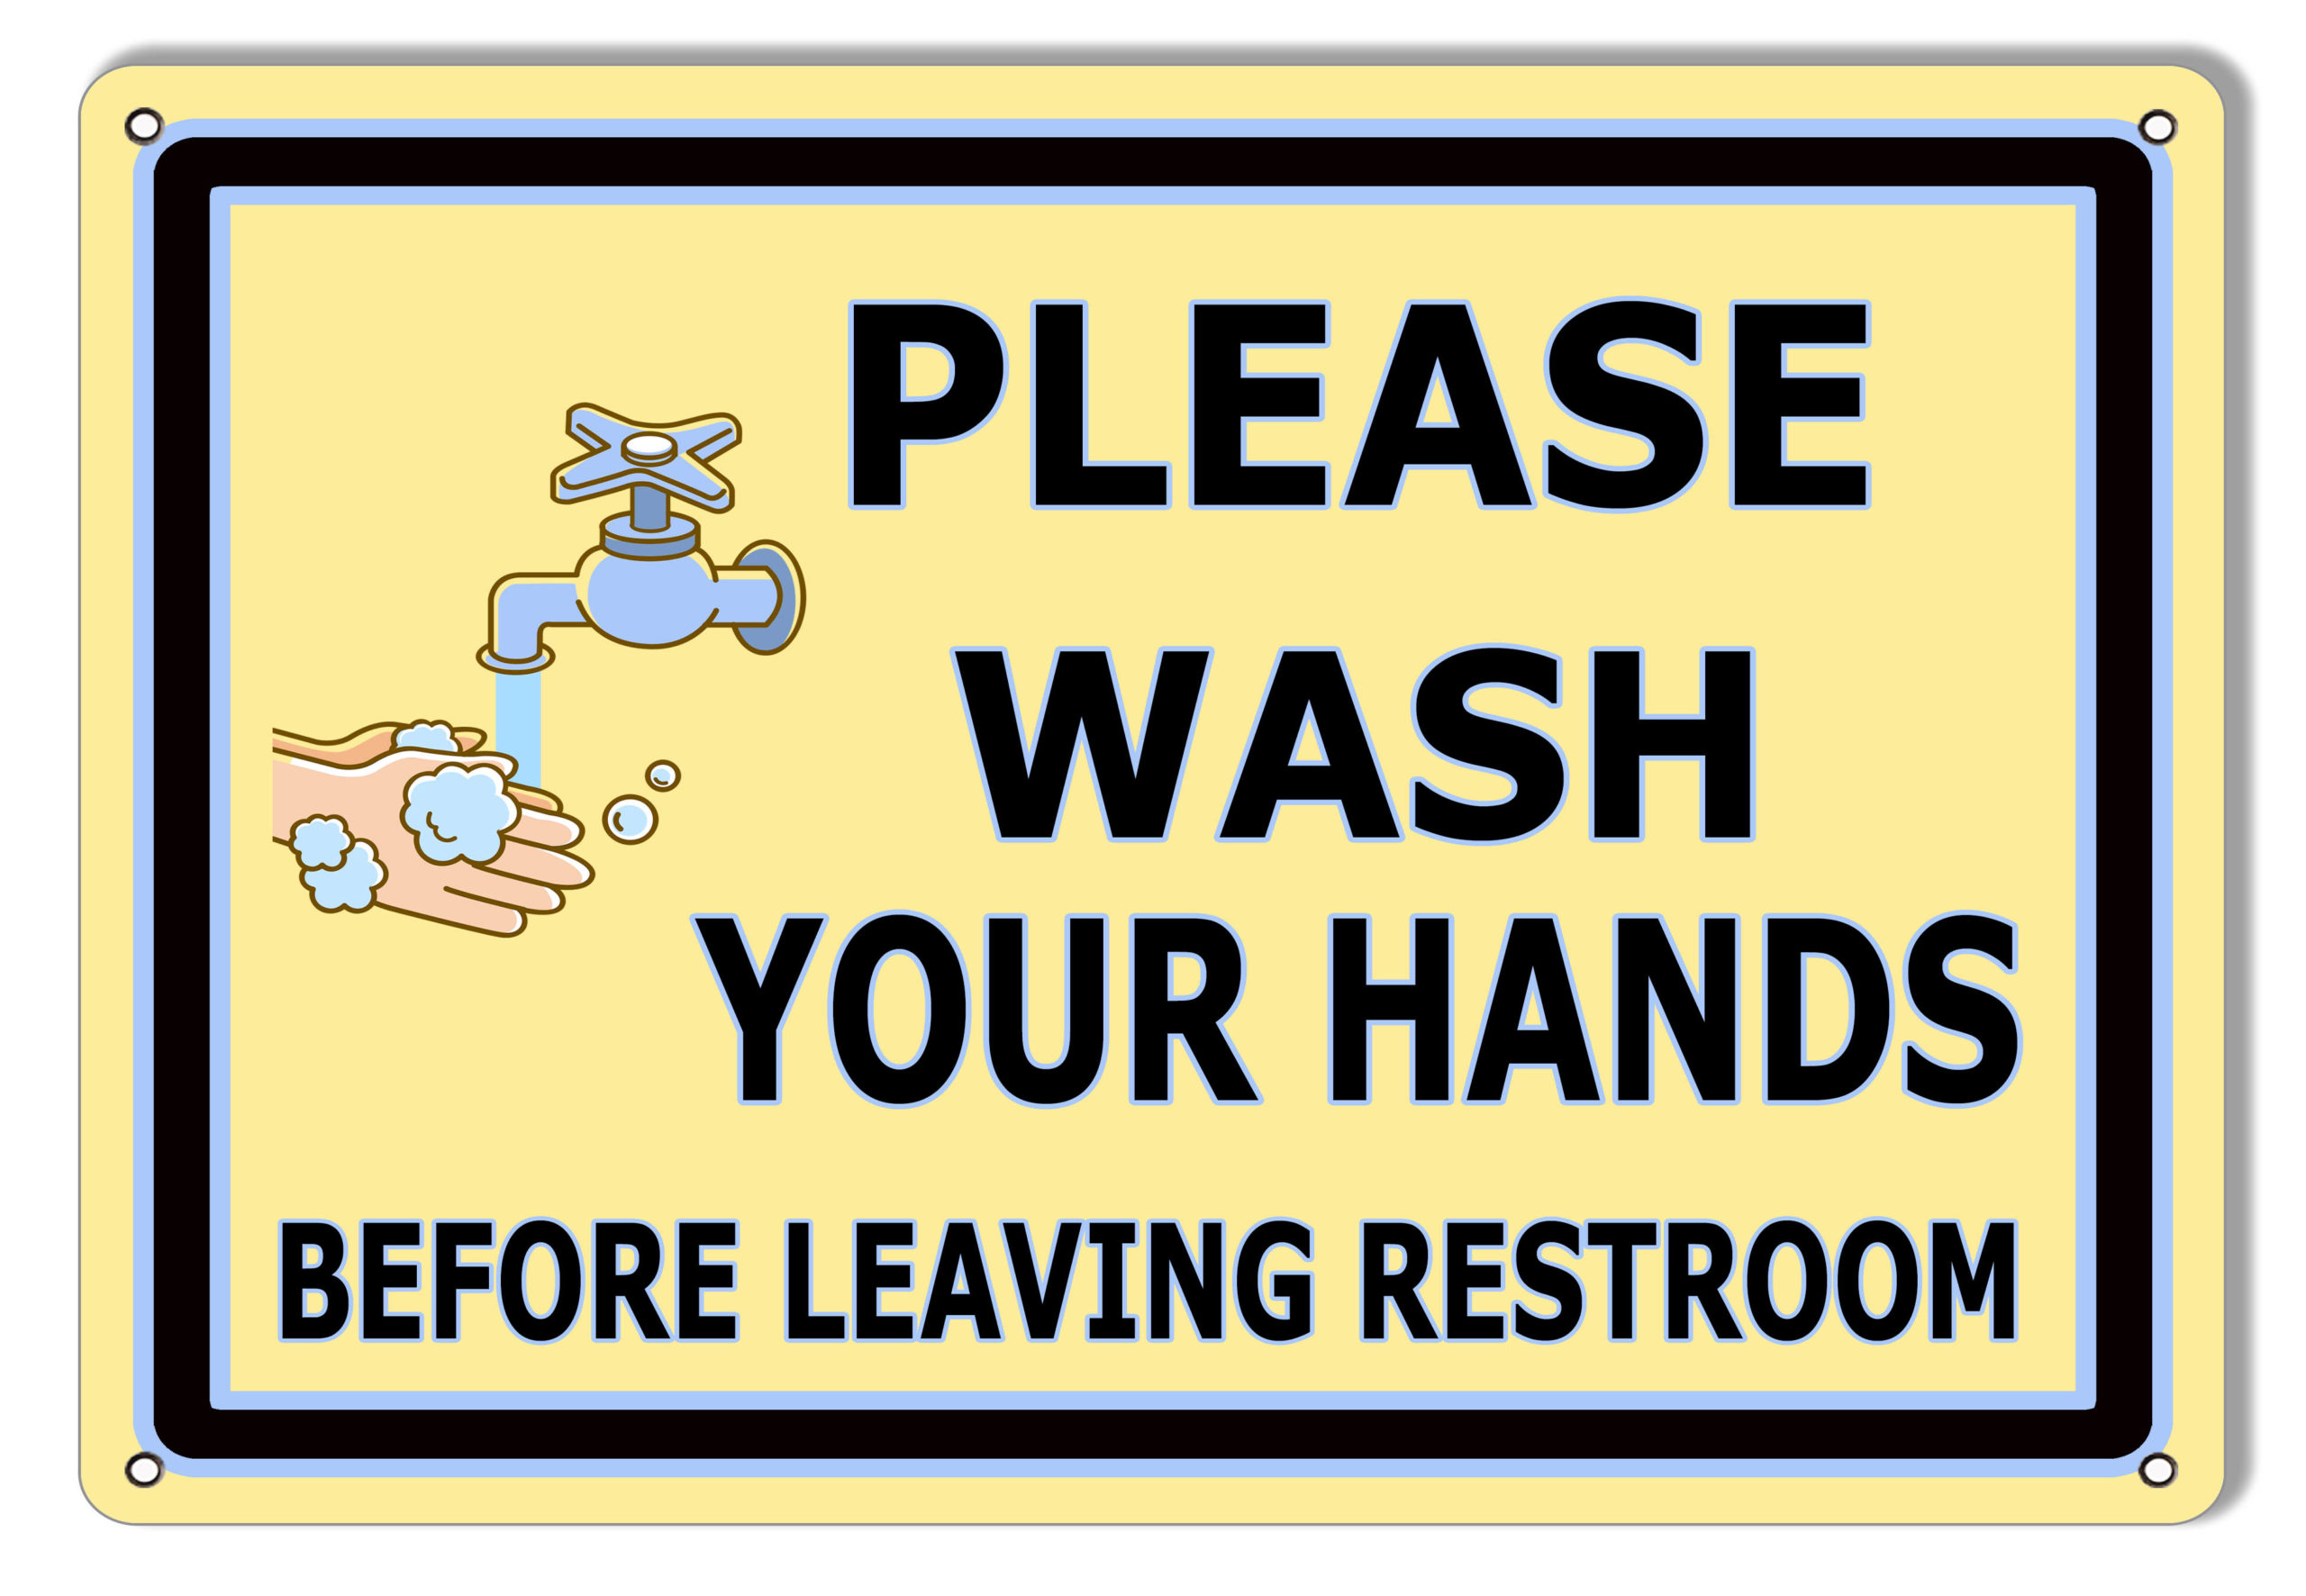 please-wash-your-hands-restroom-metal-sign-9x12-reproduction-vintage